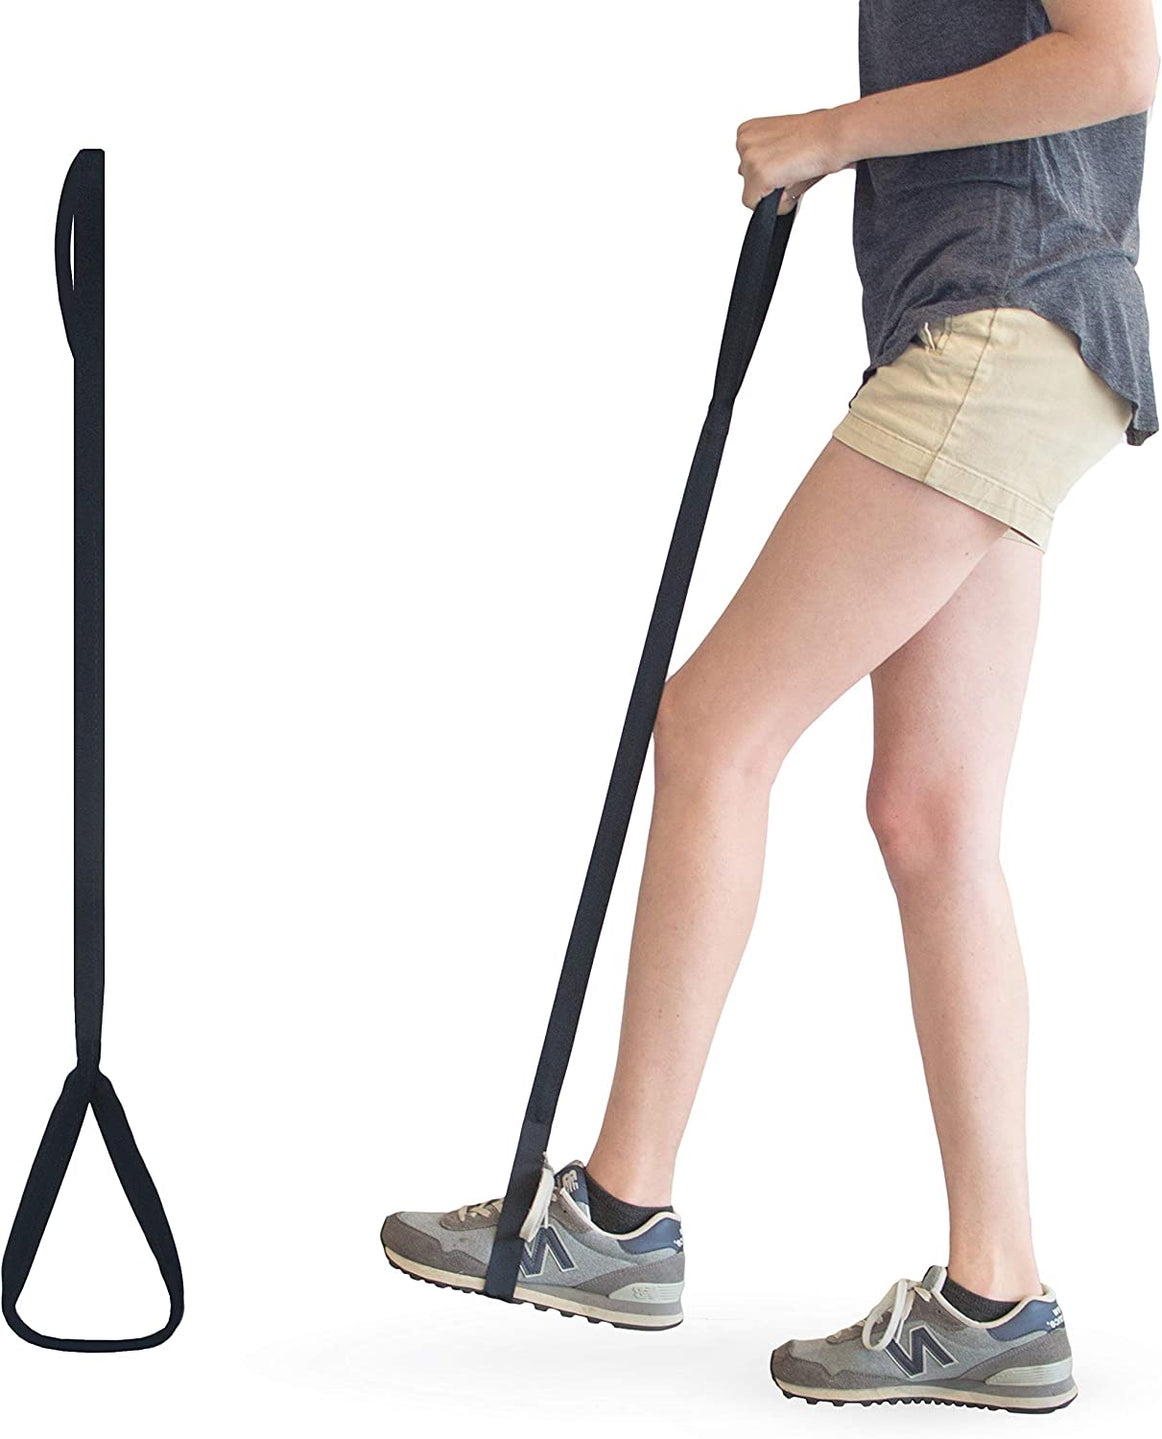 Leg Lifter | Foot Loop | Ideal Mobility Tool for Wheelchair